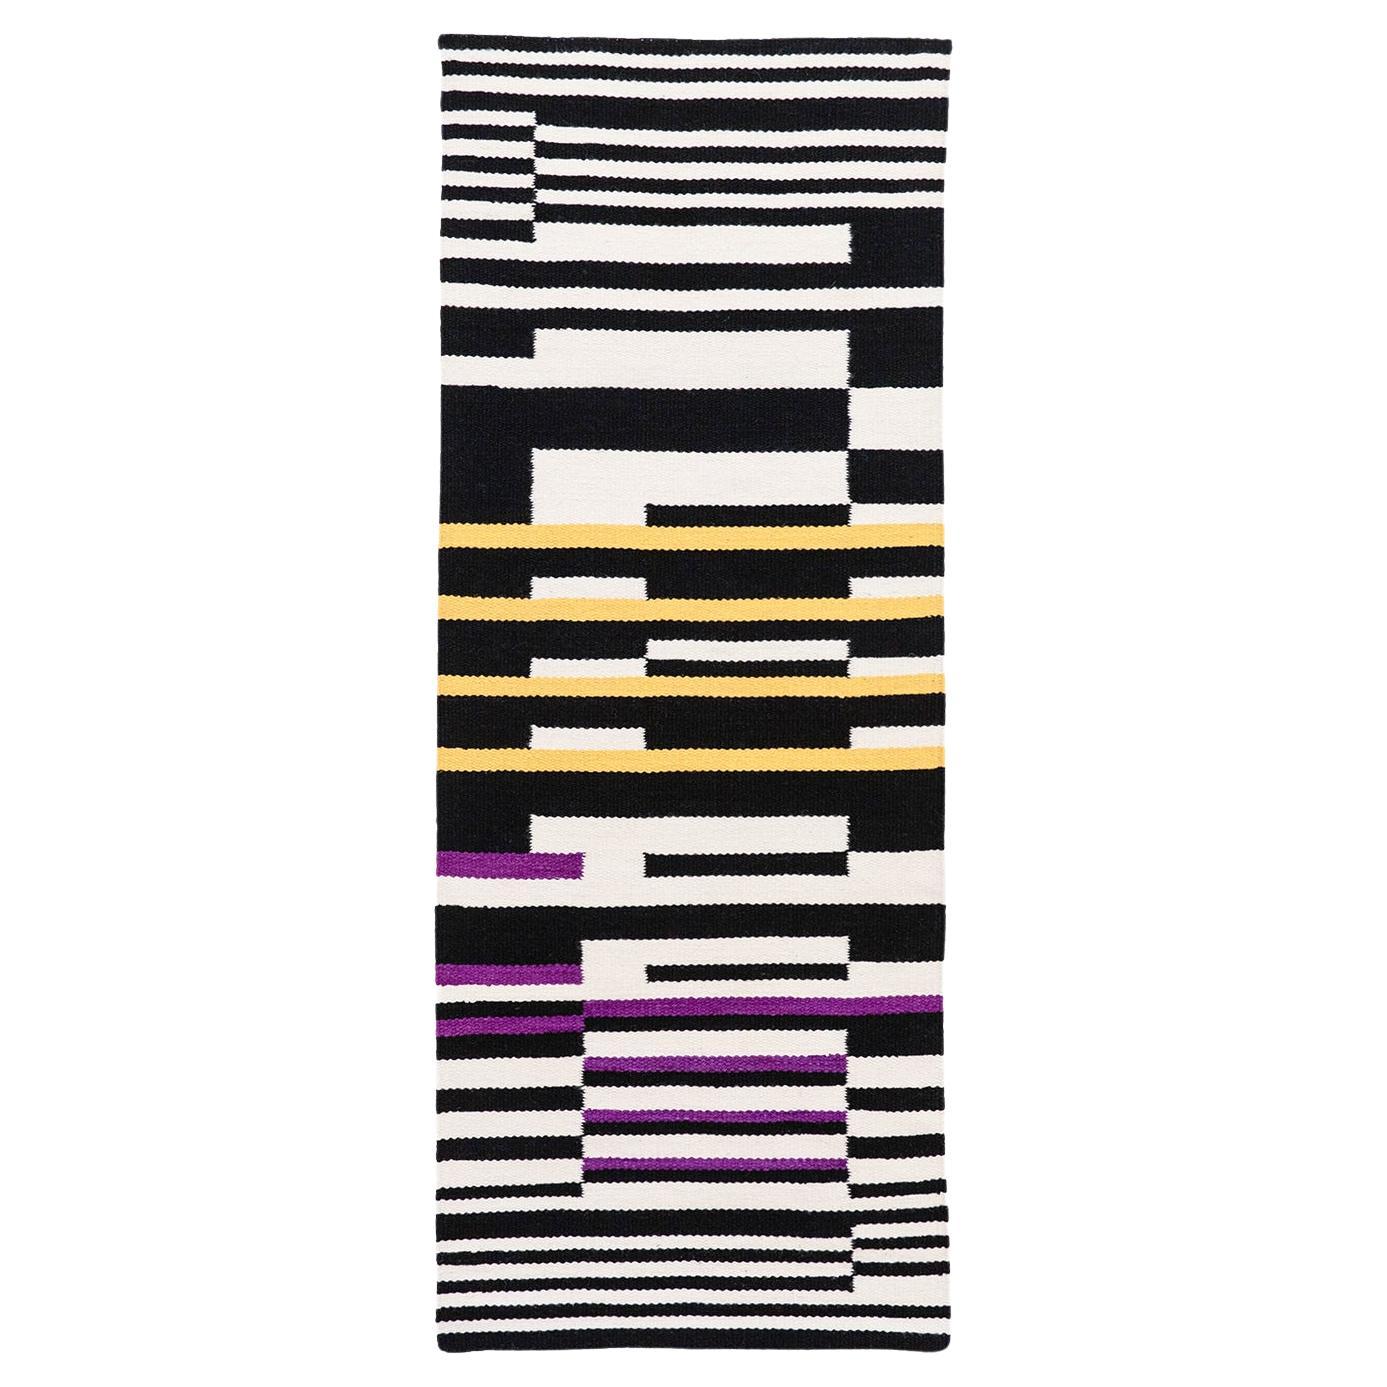 Hand-woven wool rug "Stripes" by Ary Brizzi